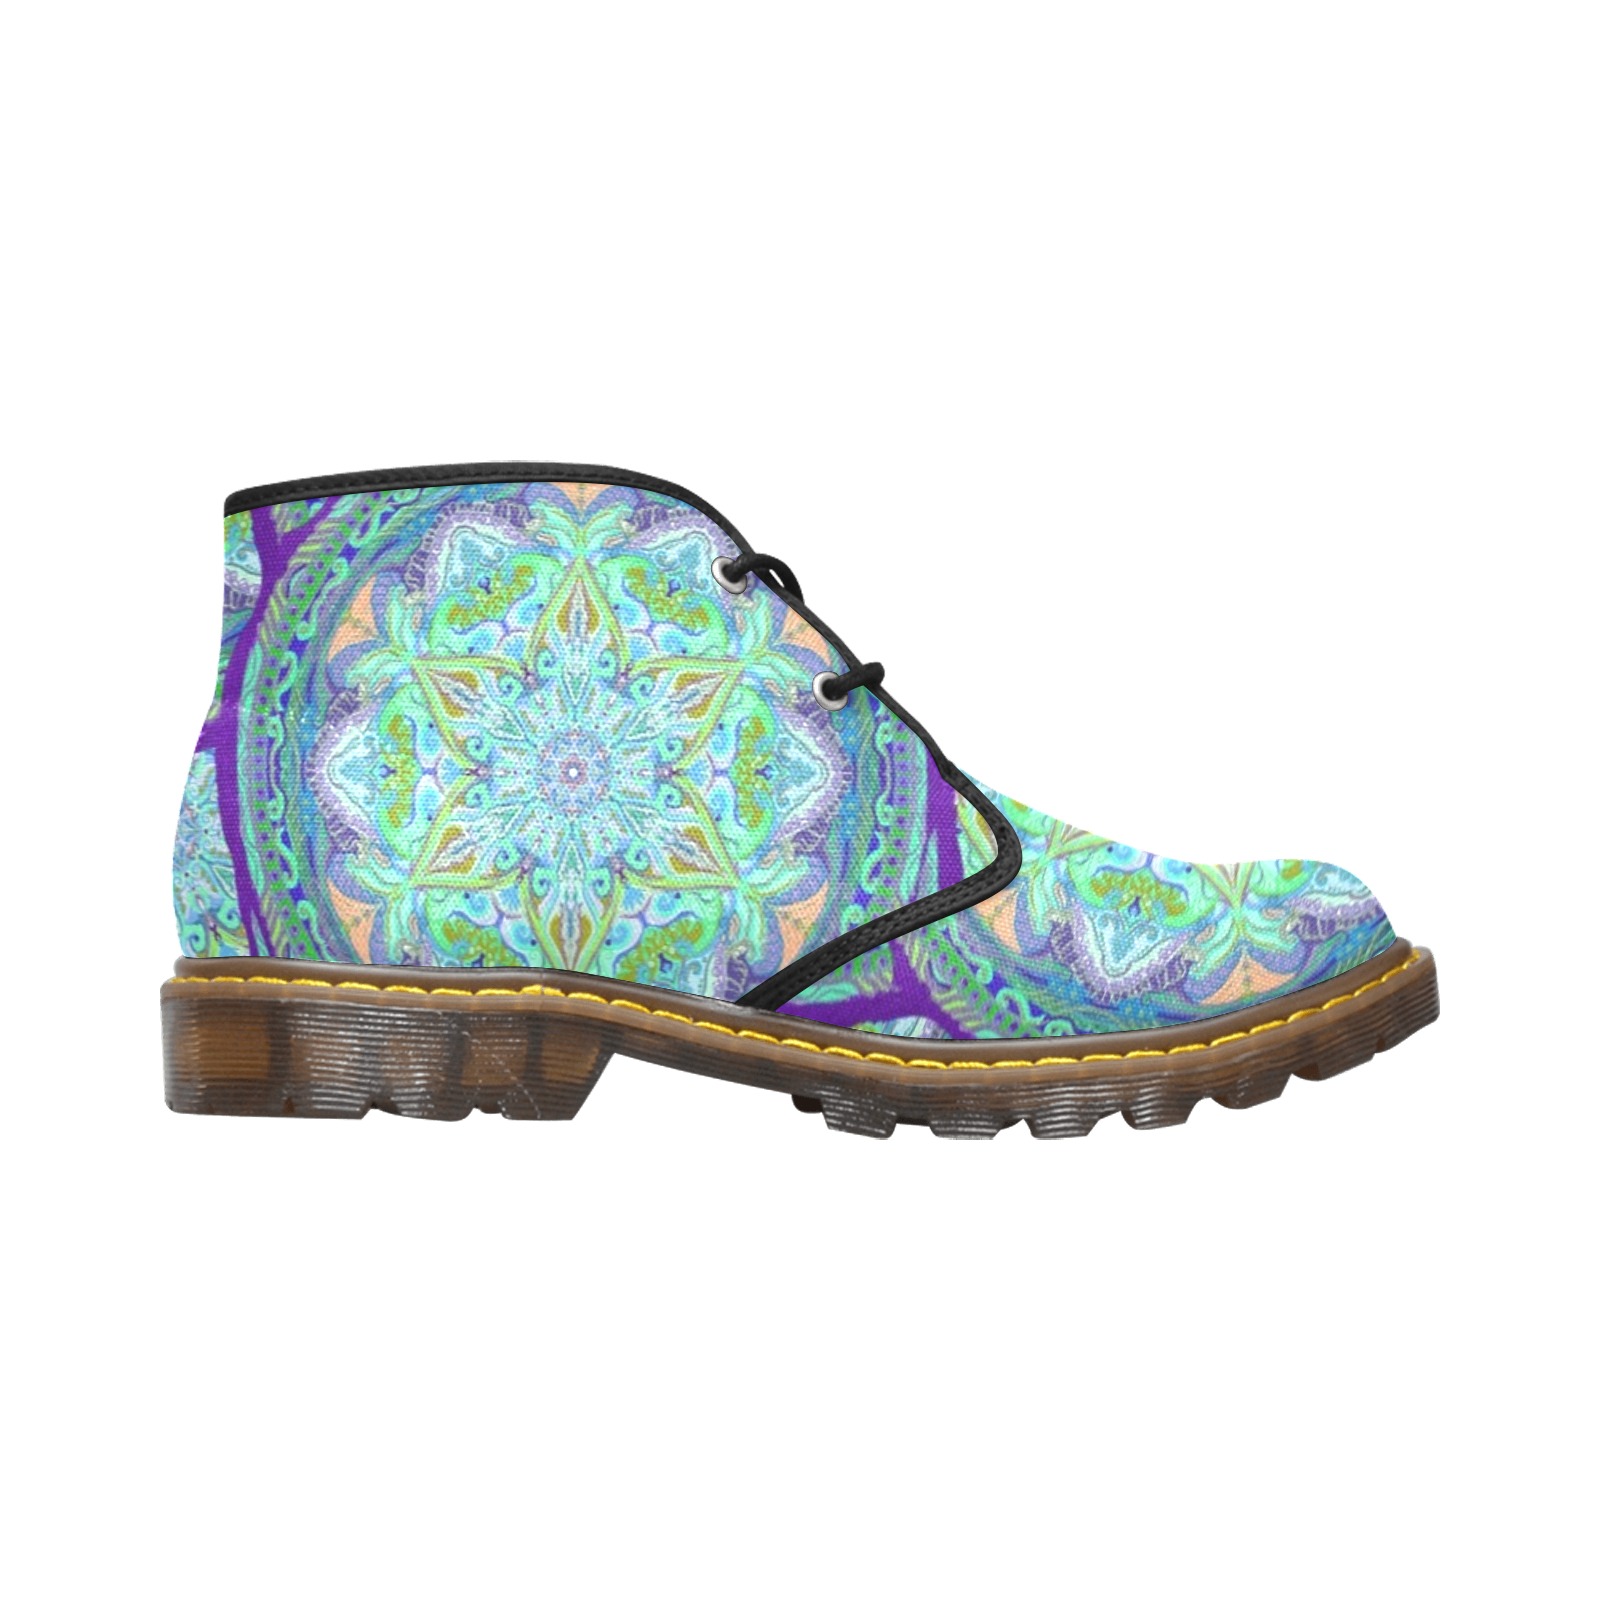 embroidery-green Women's Canvas Chukka Boots (Model 2402-1)